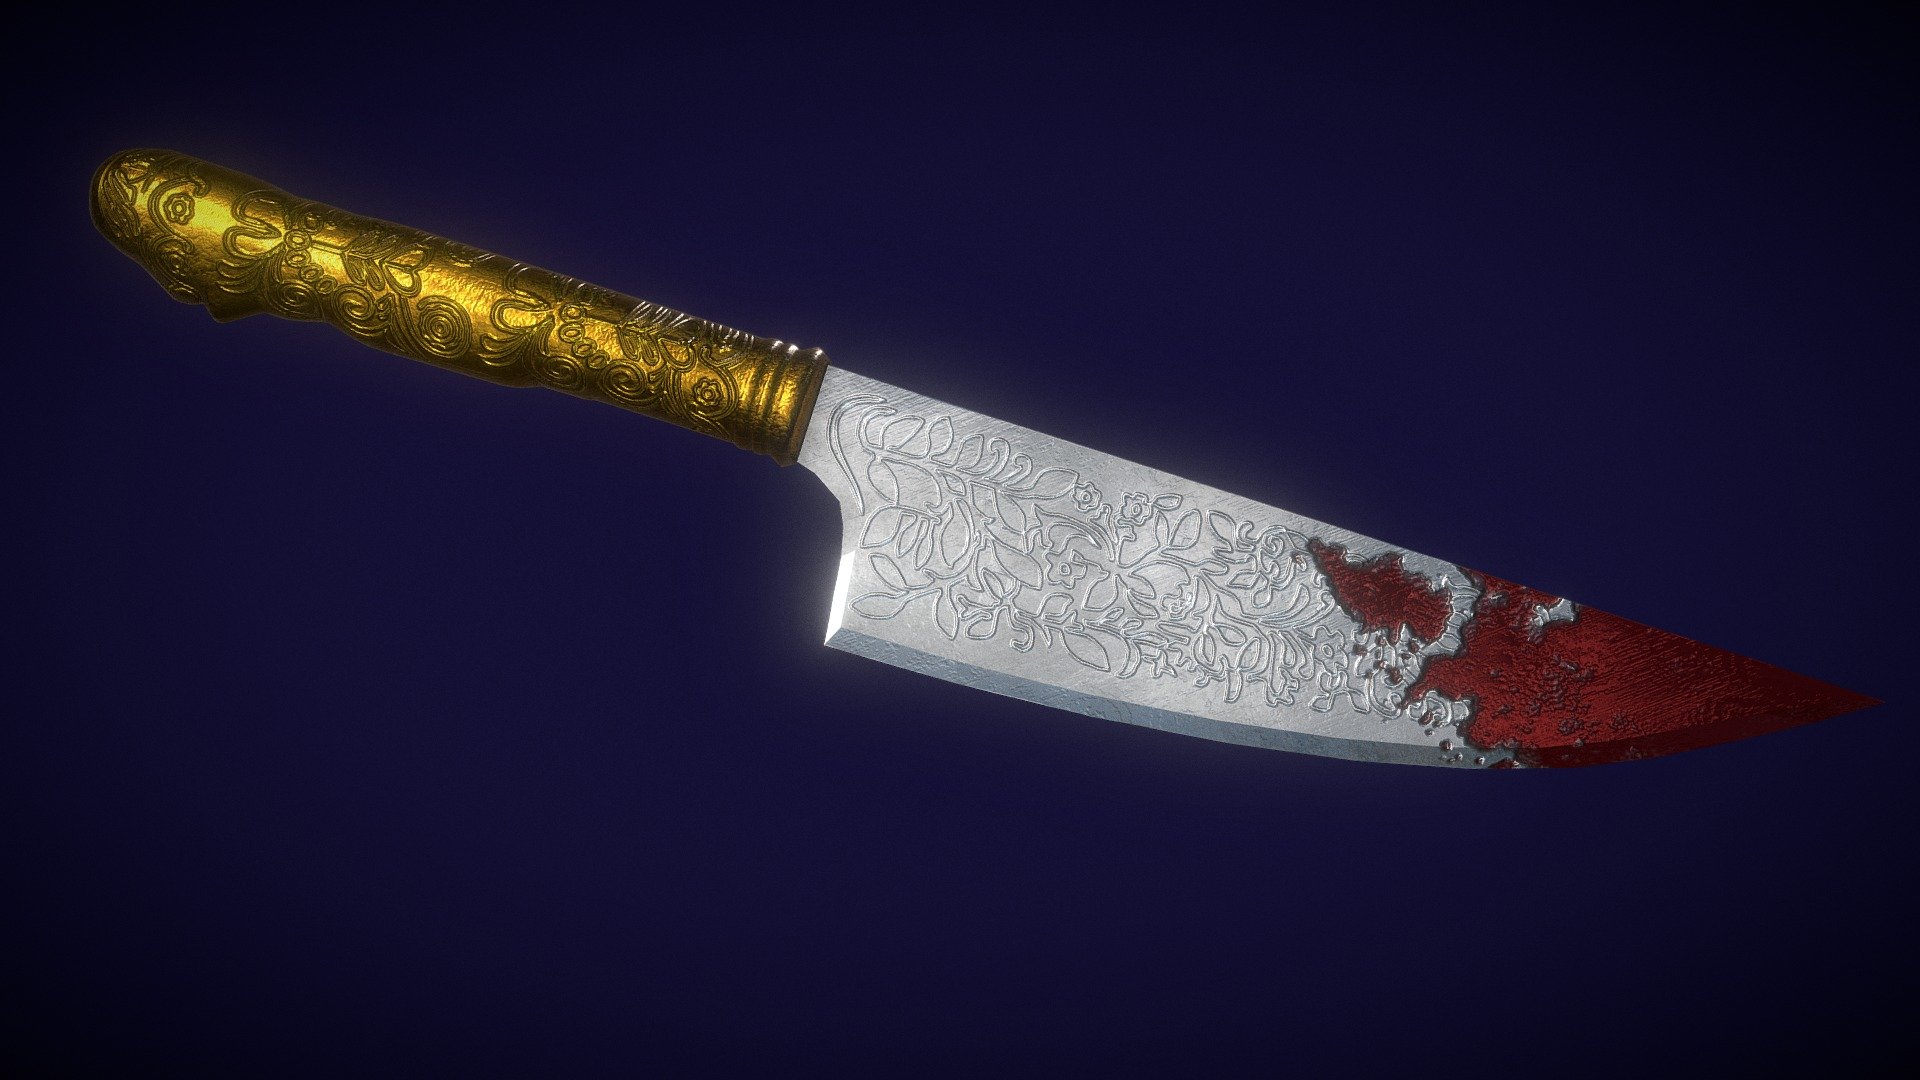 This is Alice's Vorpal Blade from Alice Madness Returns. It might not be perfect, but it will still kill you. * Chuckles * - Alice's Vorpal Blade - 3D model by alyblue10 3d model